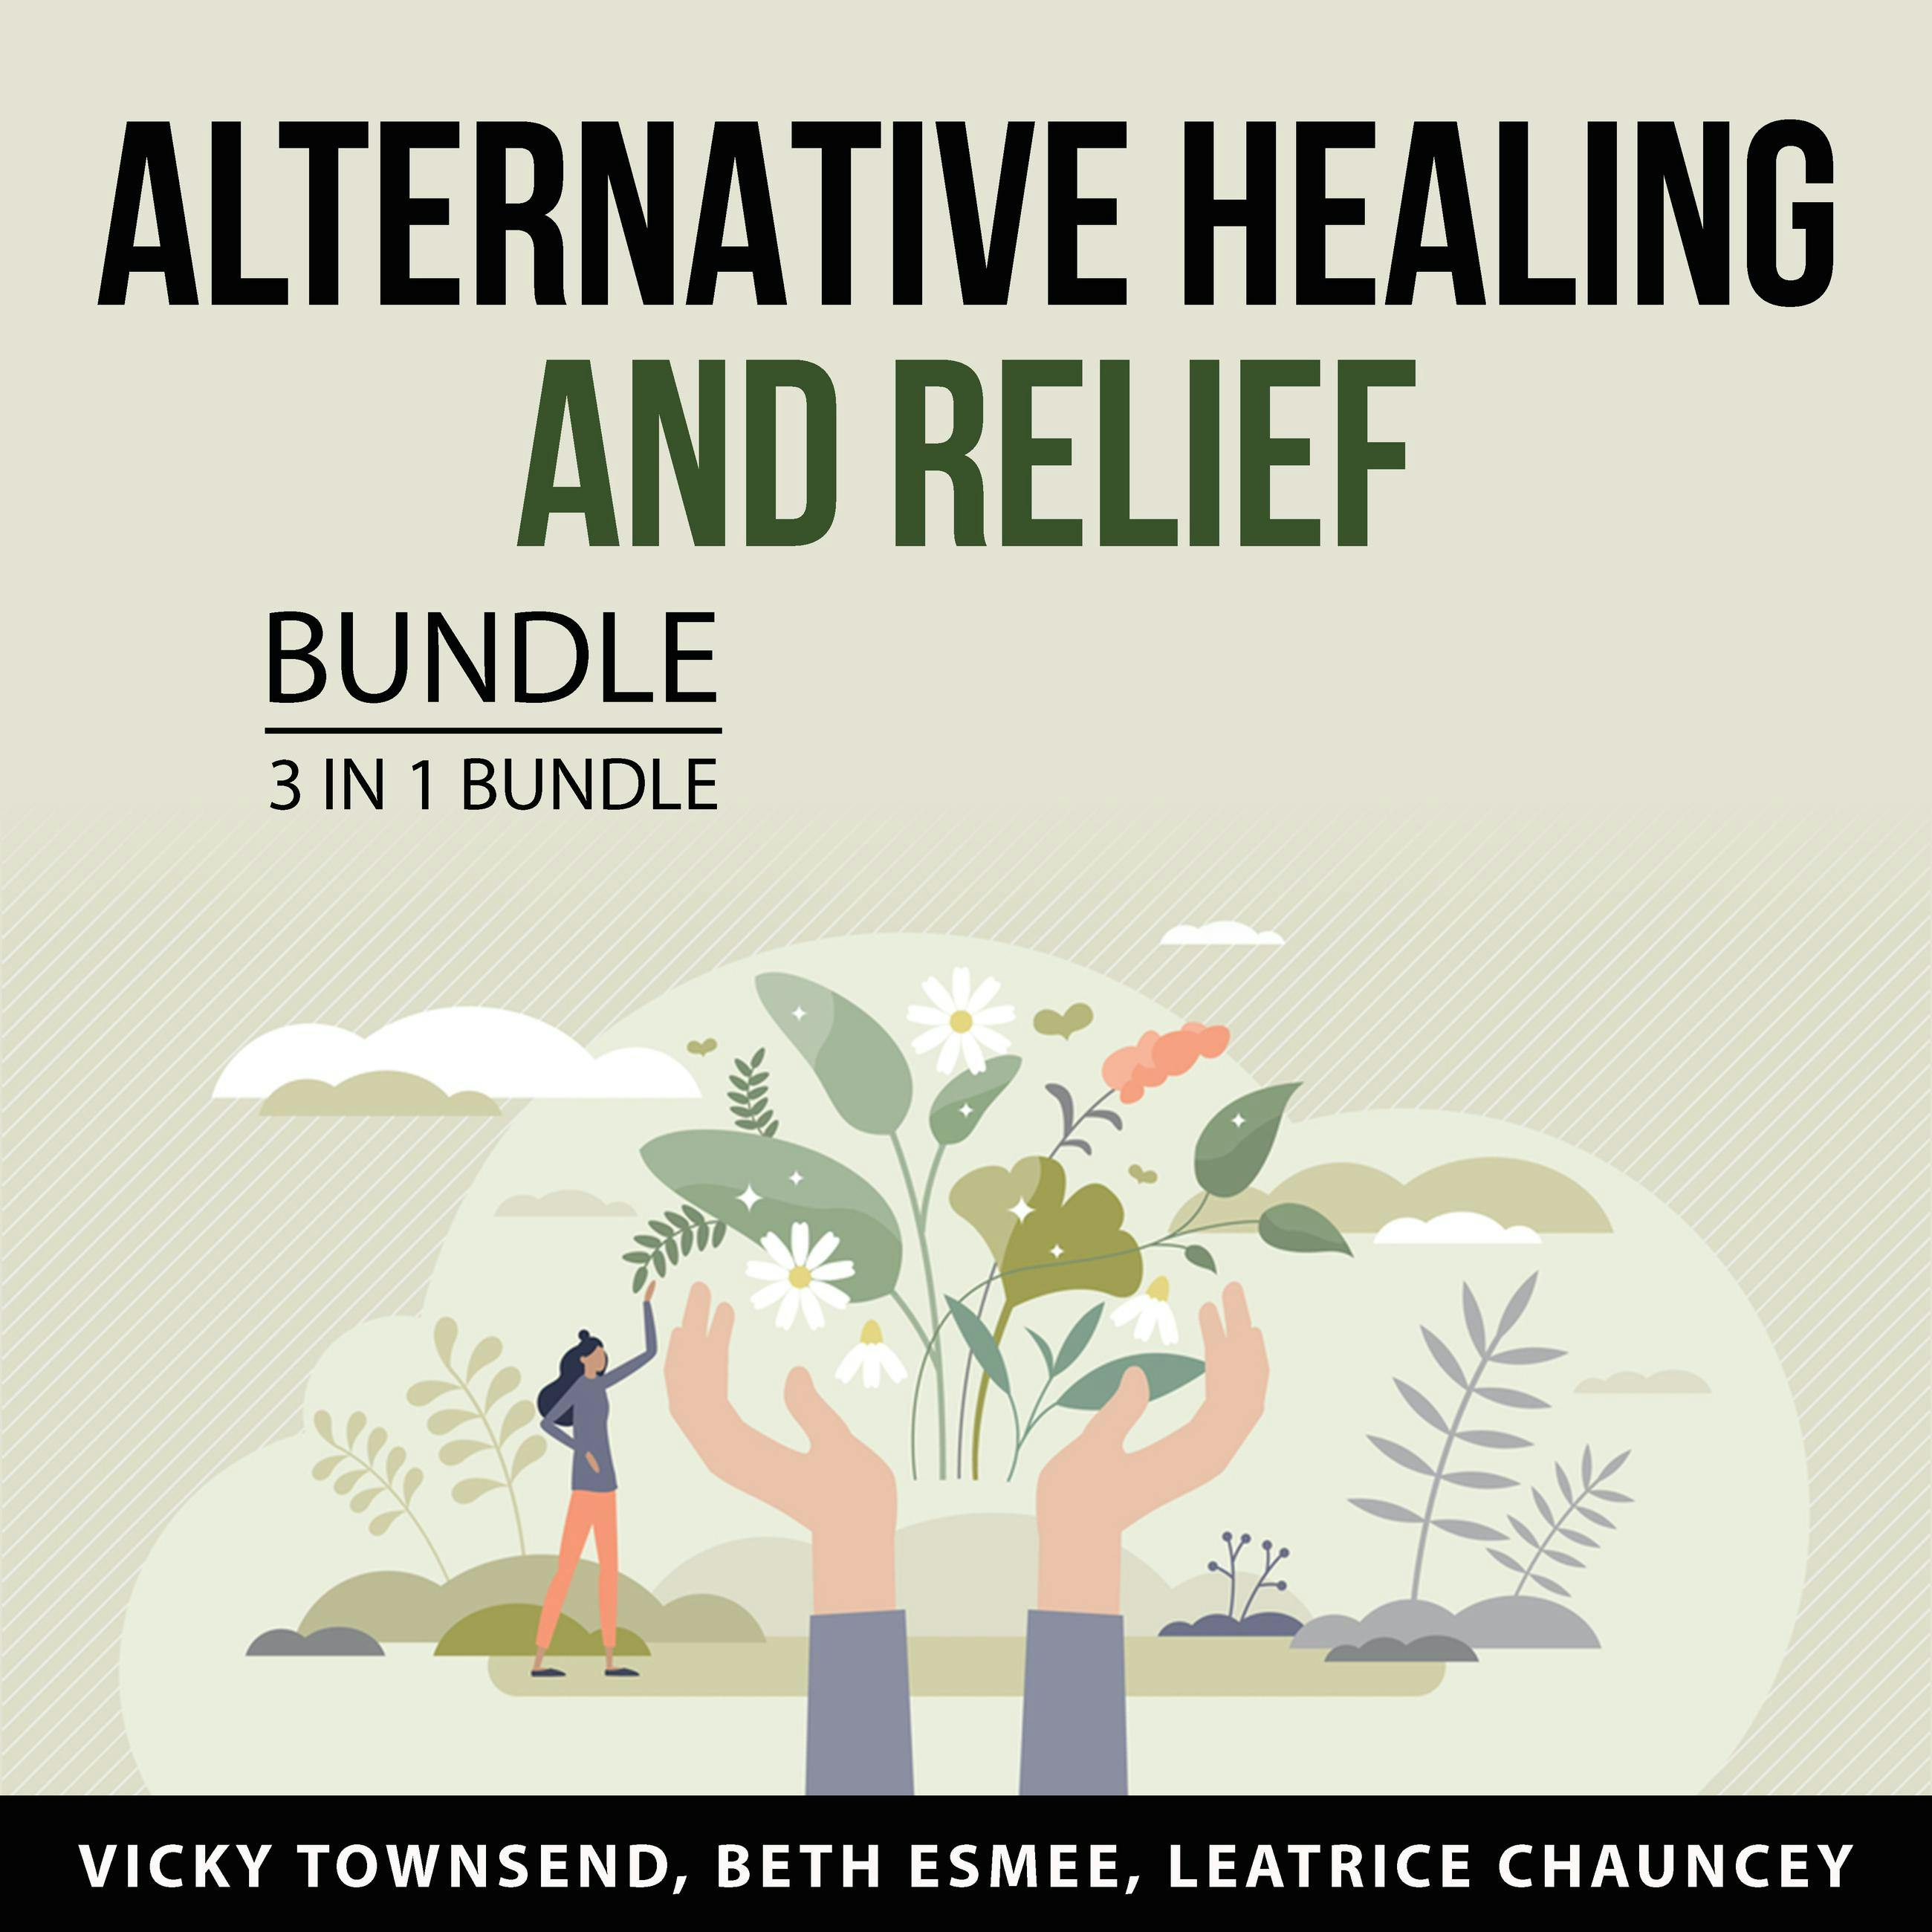 Alternative Healing and Relief Bundle, 3 in 1 Bundle: Medicinal Plants Handbook, Healing Through Medicinal Herbs, and Aromatherapy and Essential Oils for Healing - Leatrice Chauncey, Vicky Townsend, Beth Esmee